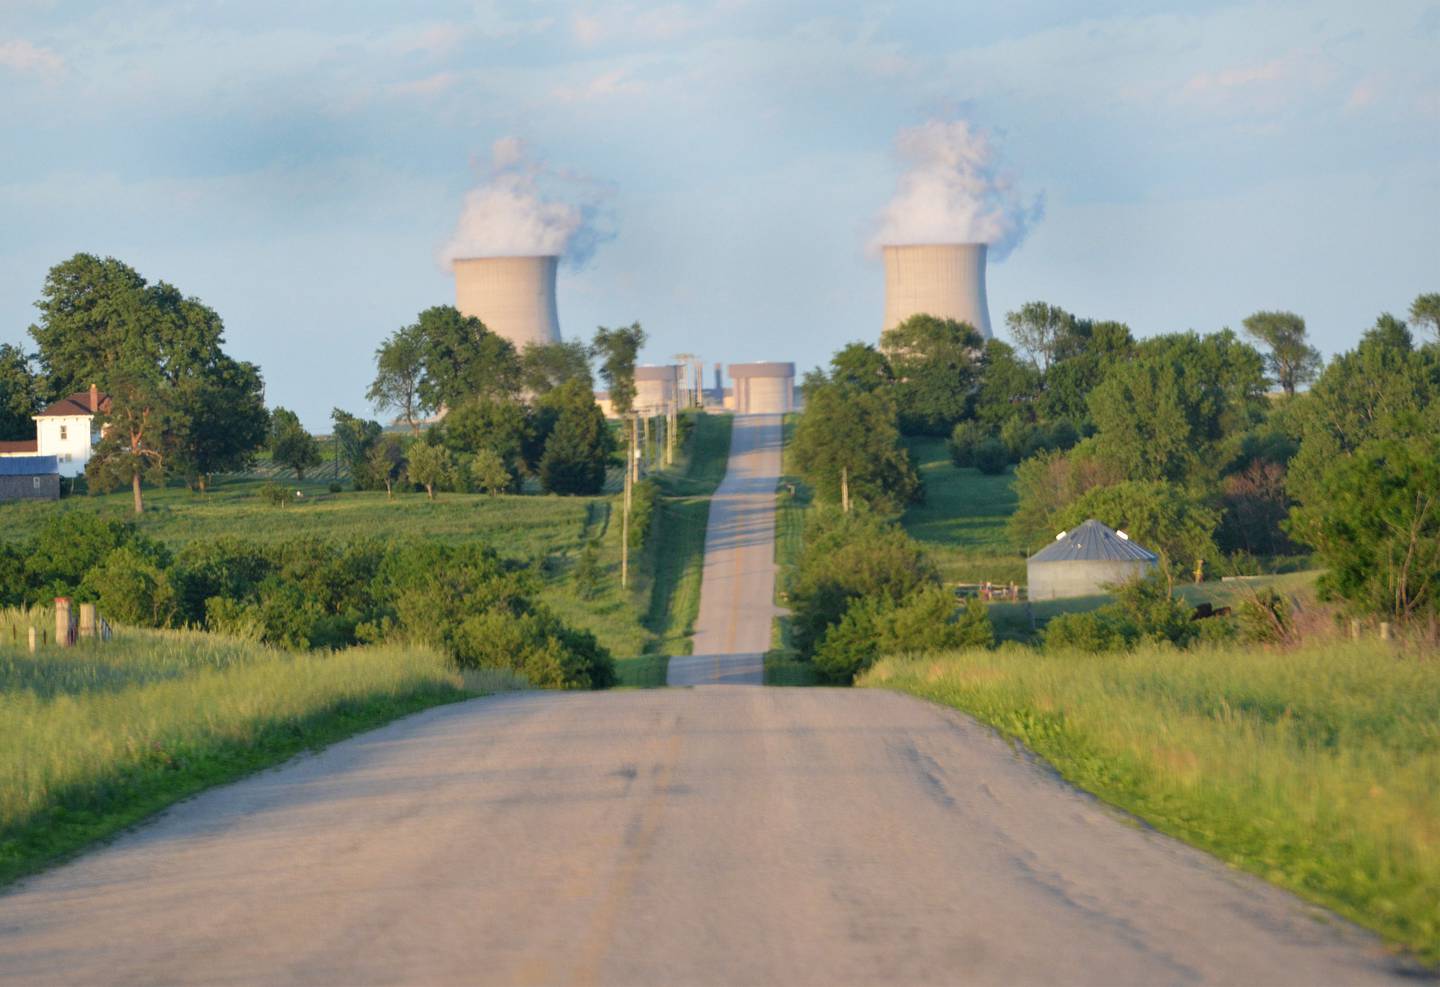 The cooling towers of Exelon's Byron nuclear power plant can be seen in the distance from Mid Town Road, northeast of Mt. Morris.